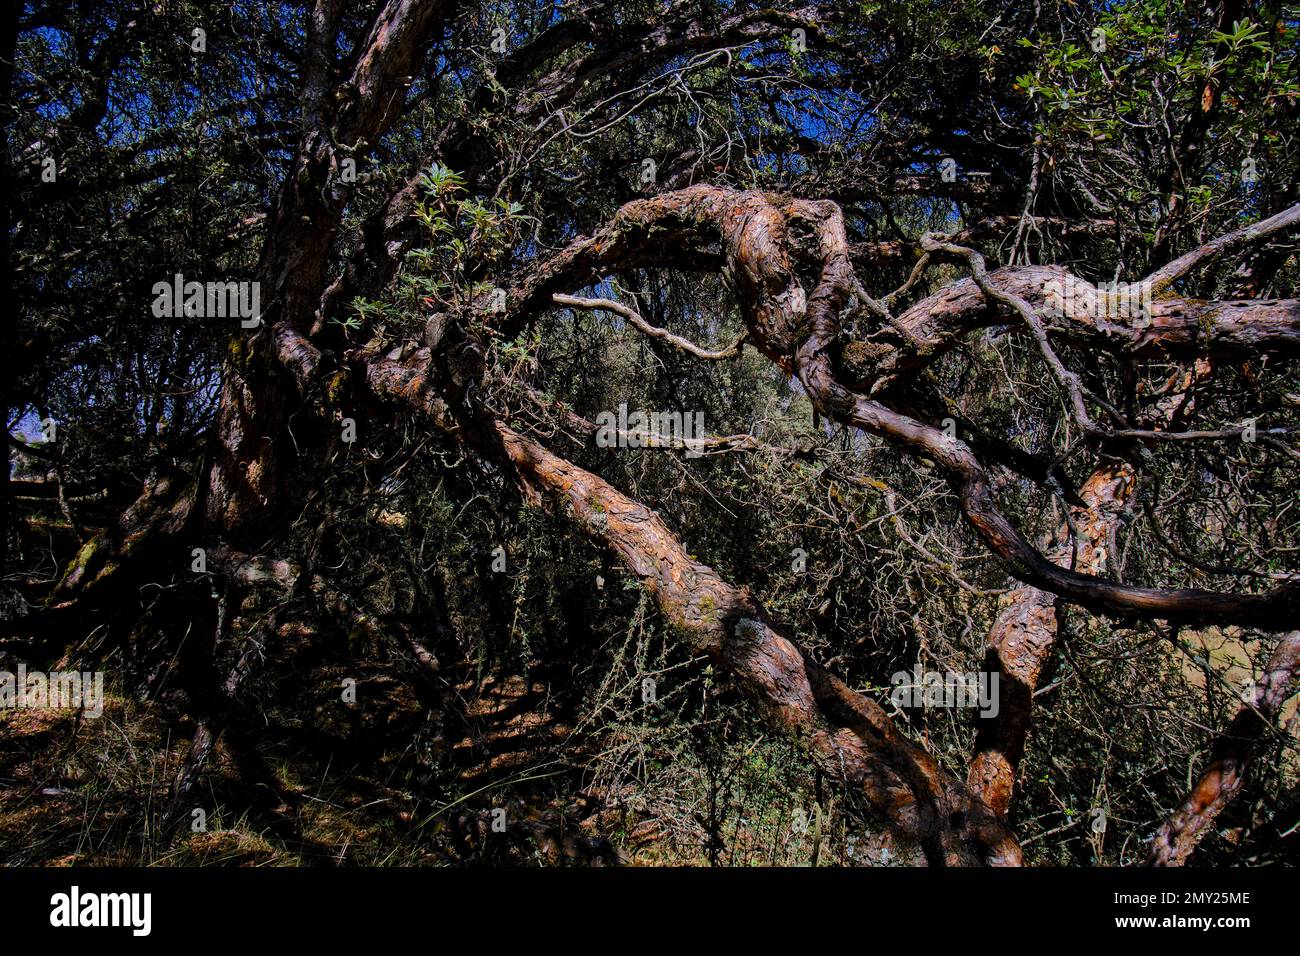 Paper tree (Polylepis incana), beautiful detail of native forest in the Peruvian Andes, shows curious details of its way of growing. Stock Photo